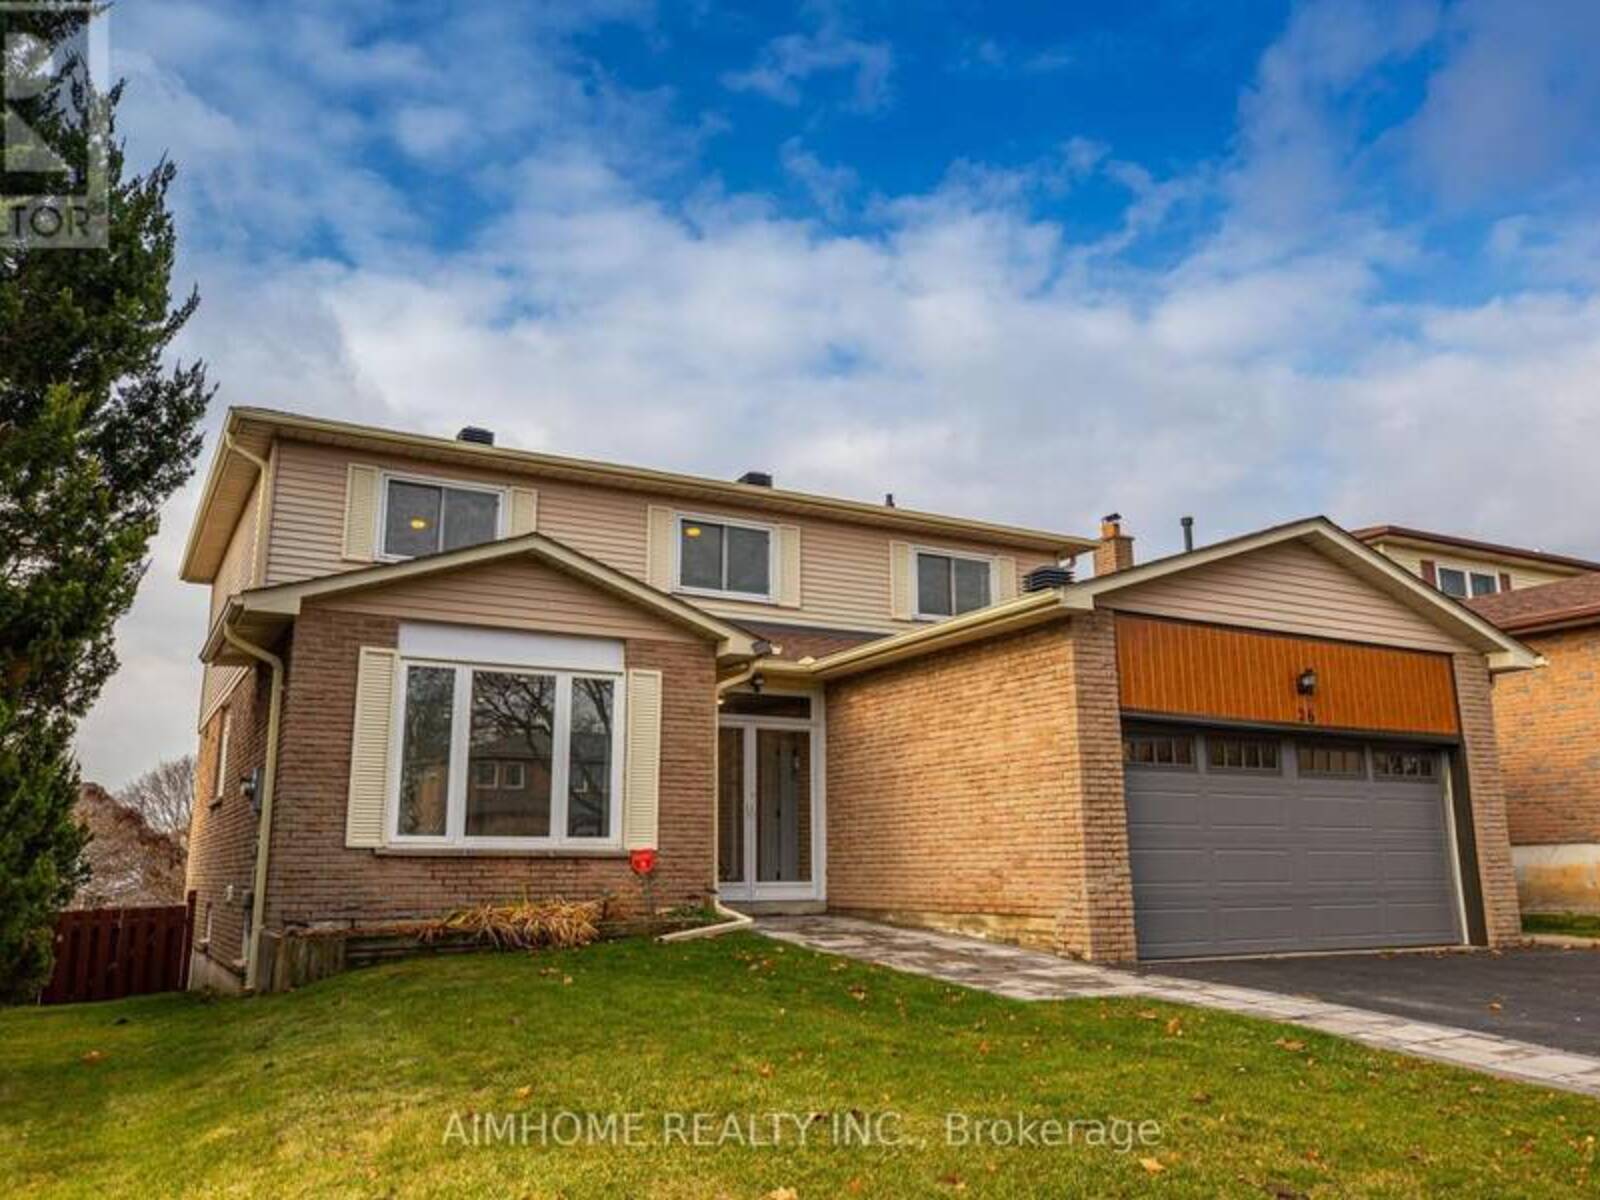 26 HAWKSTONE CRES, Whitby, Ontario L1N 6R6